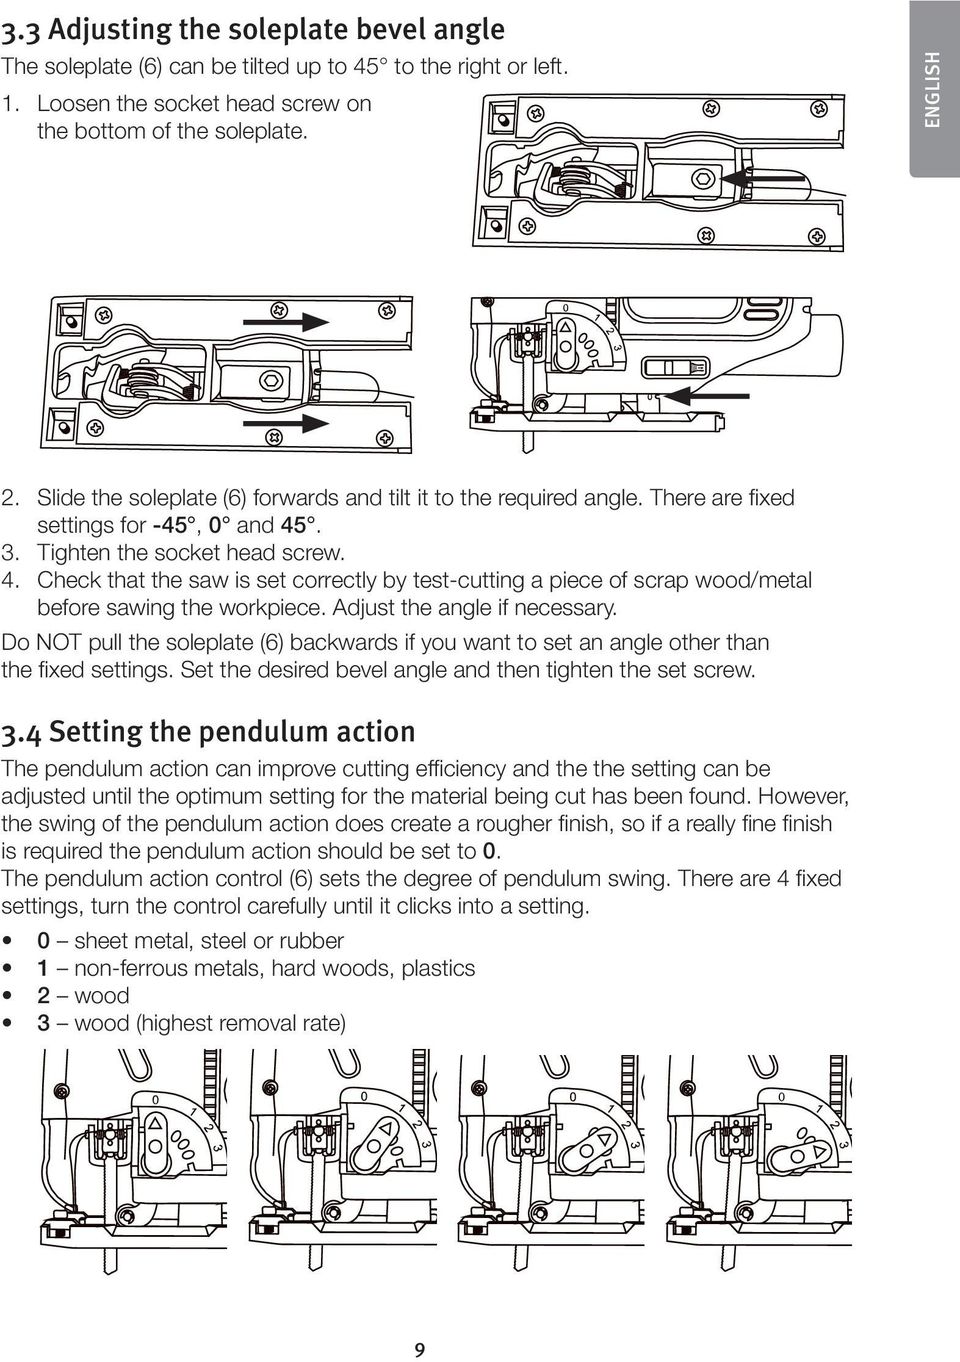 . 3. Tighten the socket head screw. 4. Check that the saw is set correctly by test-cutting a piece of scrap wood/metal before sawing the workpiece. Adjust the angle if necessary.